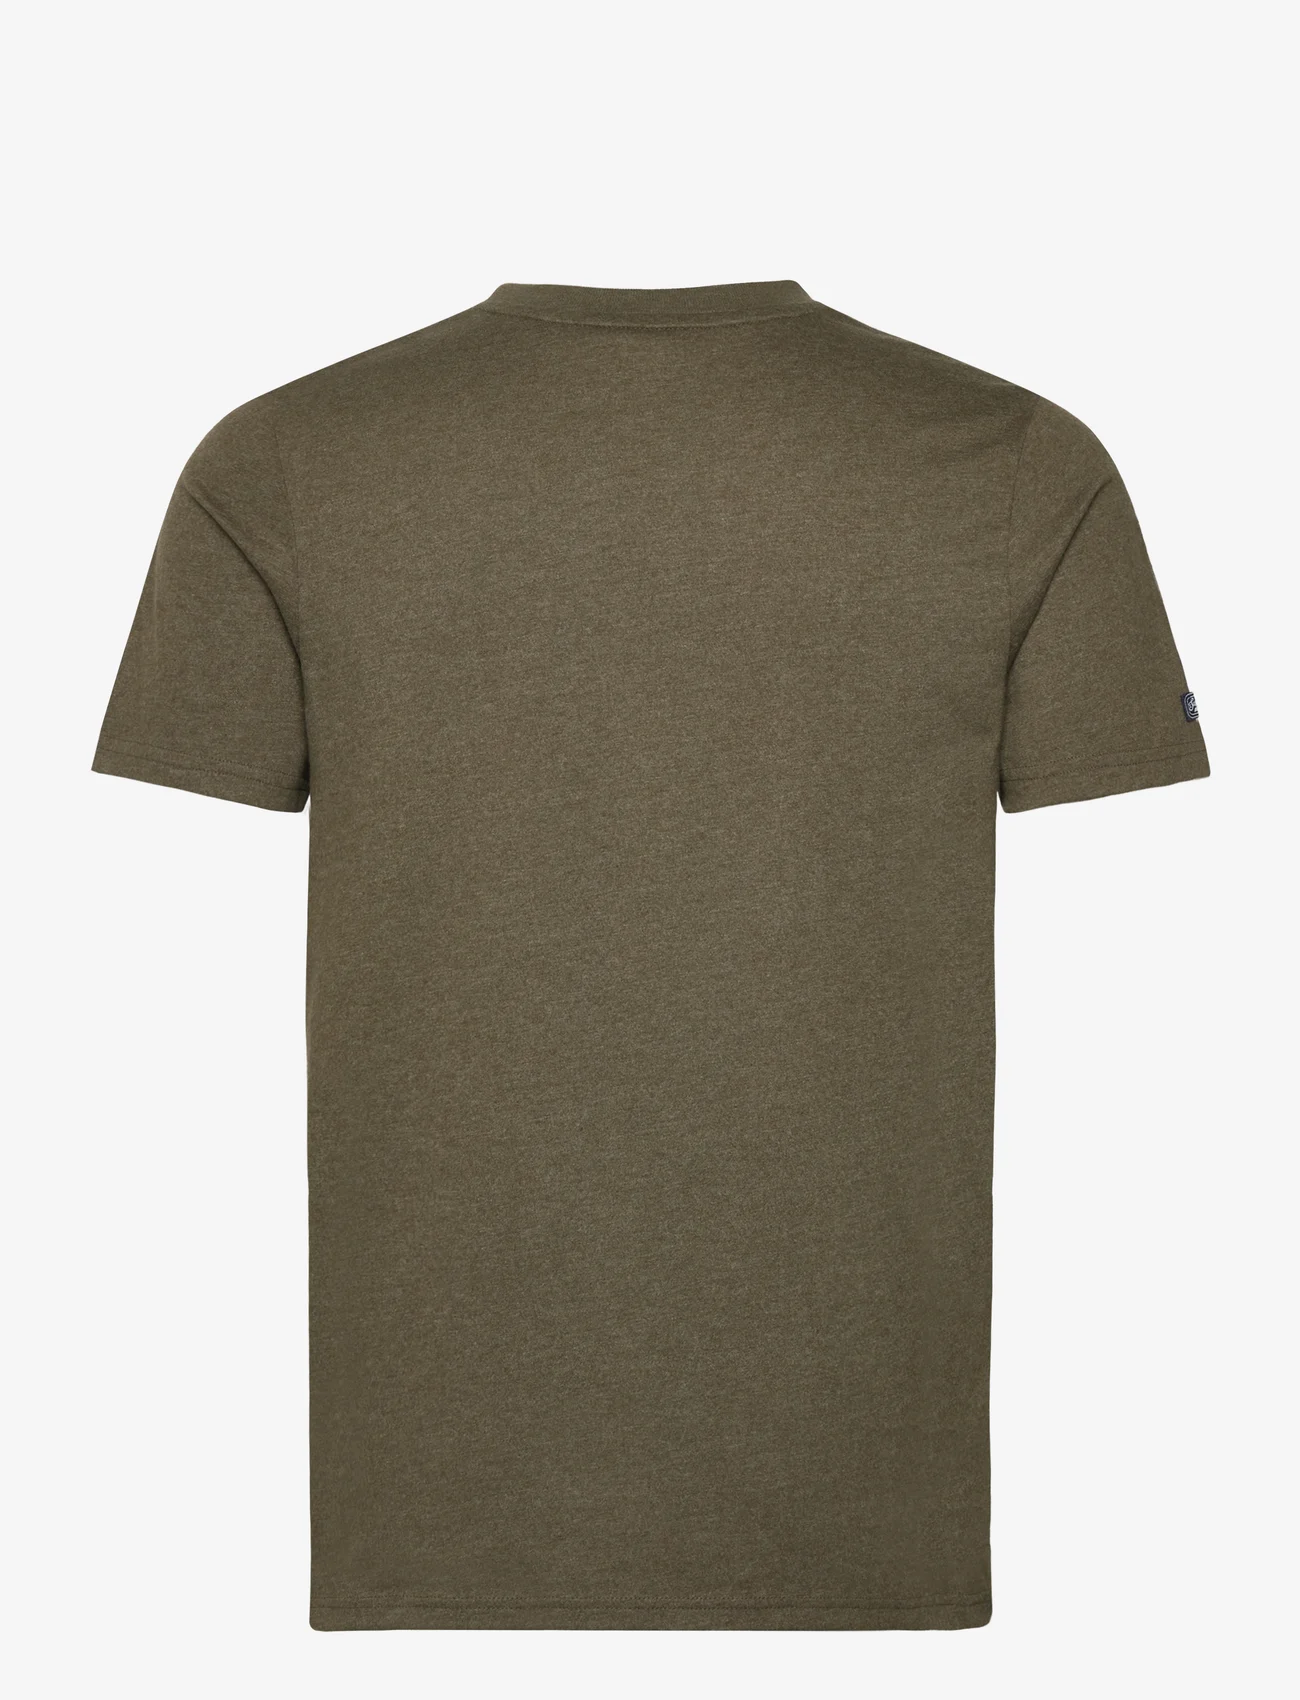 Superdry - VL Premium Goods Graphic Tee - lowest prices - thrift olive marl - 1